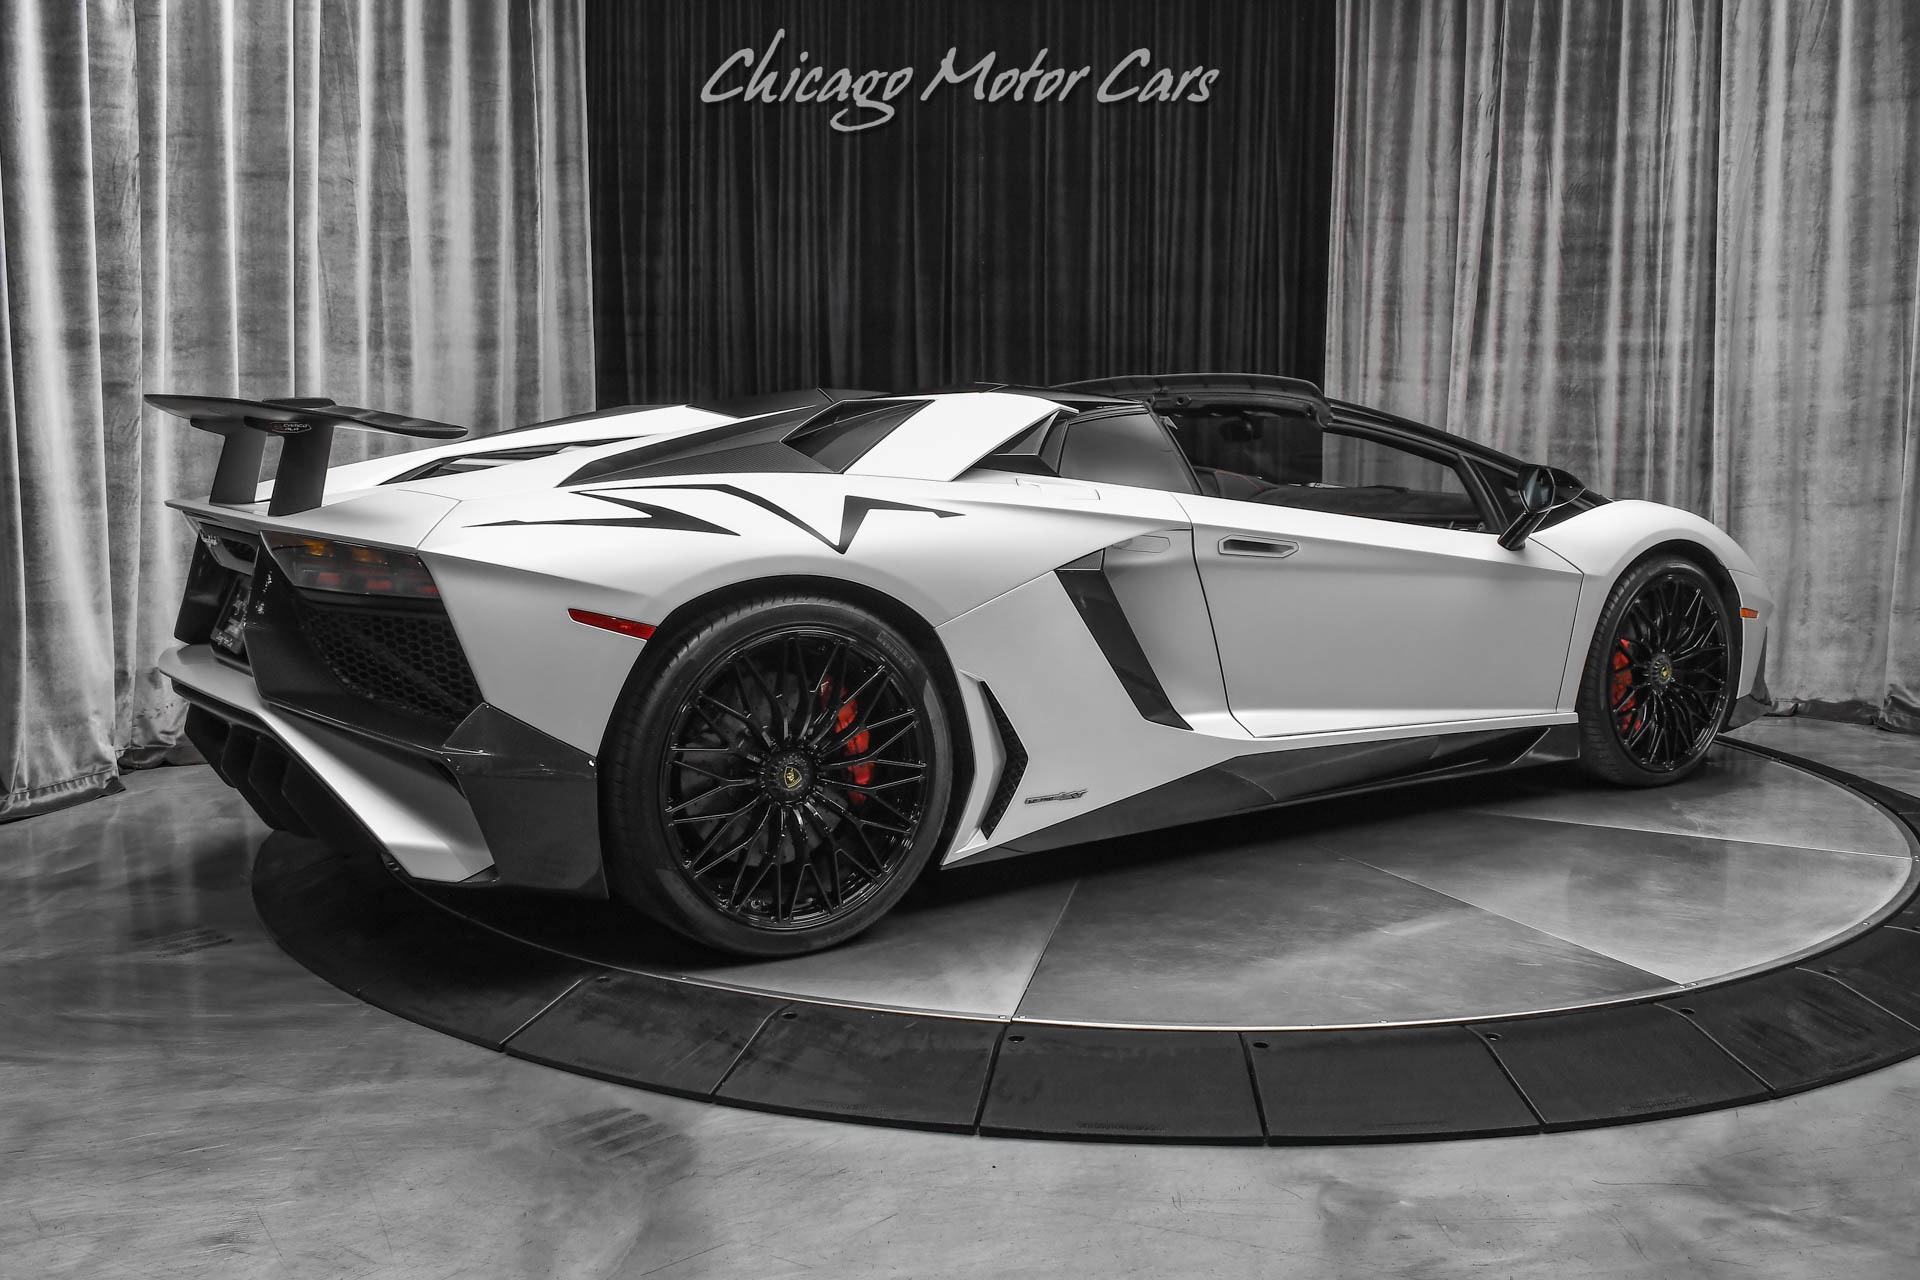 Used 2016 Lamborghini Aventador LP750-4 SV Roadster ONLY 3K Miles! RARE  Factory Satin Paint! LOADED! For Sale (Special Pricing) | Chicago Motor  Cars Stock #19323A